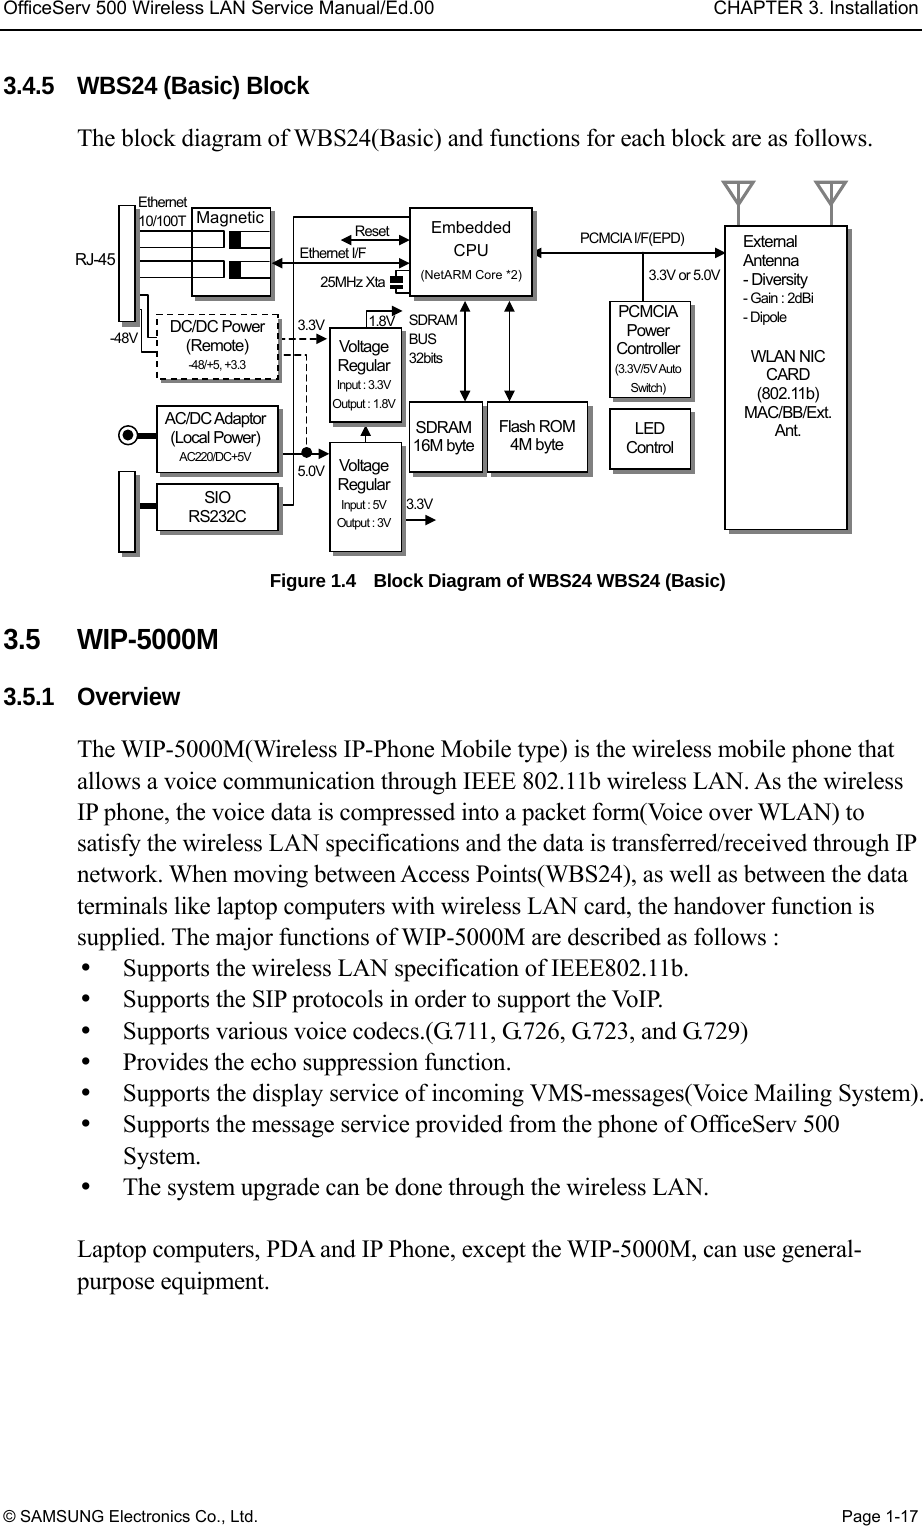 OfficeServ 500 Wireless LAN Service Manual/Ed.00  CHAPTER 3. Installation © SAMSUNG Electronics Co., Ltd.  Page 1-17 3.4.5  WBS24 (Basic) Block The block diagram of WBS24(Basic) and functions for each block are as follows. Figure 1.4    Block Diagram of WBS24 WBS24 (Basic)  3.5 WIP-5000M 3.5.1 Overview The WIP-5000M(Wireless IP-Phone Mobile type) is the wireless mobile phone that allows a voice communication through IEEE 802.11b wireless LAN. As the wireless IP phone, the voice data is compressed into a packet form(Voice over WLAN) to satisfy the wireless LAN specifications and the data is transferred/received through IP network. When moving between Access Points(WBS24), as well as between the data terminals like laptop computers with wireless LAN card, the handover function is supplied. The major functions of WIP-5000M are described as follows :     Supports the wireless LAN specification of IEEE802.11b.     Supports the SIP protocols in order to support the VoIP.     Supports various voice codecs.(G.711, G.726, G.723, and G.729)   Provides the echo suppression function.     Supports the display service of incoming VMS-messages(Voice Mailing System).     Supports the message service provided from the phone of OfficeServ 500 System.    The system upgrade can be done through the wireless LAN.    Laptop computers, PDA and IP Phone, except the WIP-5000M, can use general-purpose equipment.   WLAN NIC CARD (802.11b) MAC/BB/Ext. Ant. External Antenna - Diversity - Gain : 2dBi - Dipole PCMCIAPower Controller(3.3V/5V Auto Switch)LED Control Embedded CPU (NetARM Core *2)Flash ROM 4M byteSDRAM16M byteVoltageRegularInput : 3.3V Output : 1.8VVoltageRegularInput : 5V Output : 3V AC/DC Adaptor (Local Power) AC220/DC+5V SIO RS232C DC/DC Power (Remote) -48/+5, +3.3 25MHz XtaReset Ethernet I/FEthernet 10/100T RJ-45 -48V  3.3V 5.0V 1.8V  SDRAM BUS 32bits PCMCIA I/F(EPD) 3.3V or 5.0V 3.3V Magnetic 